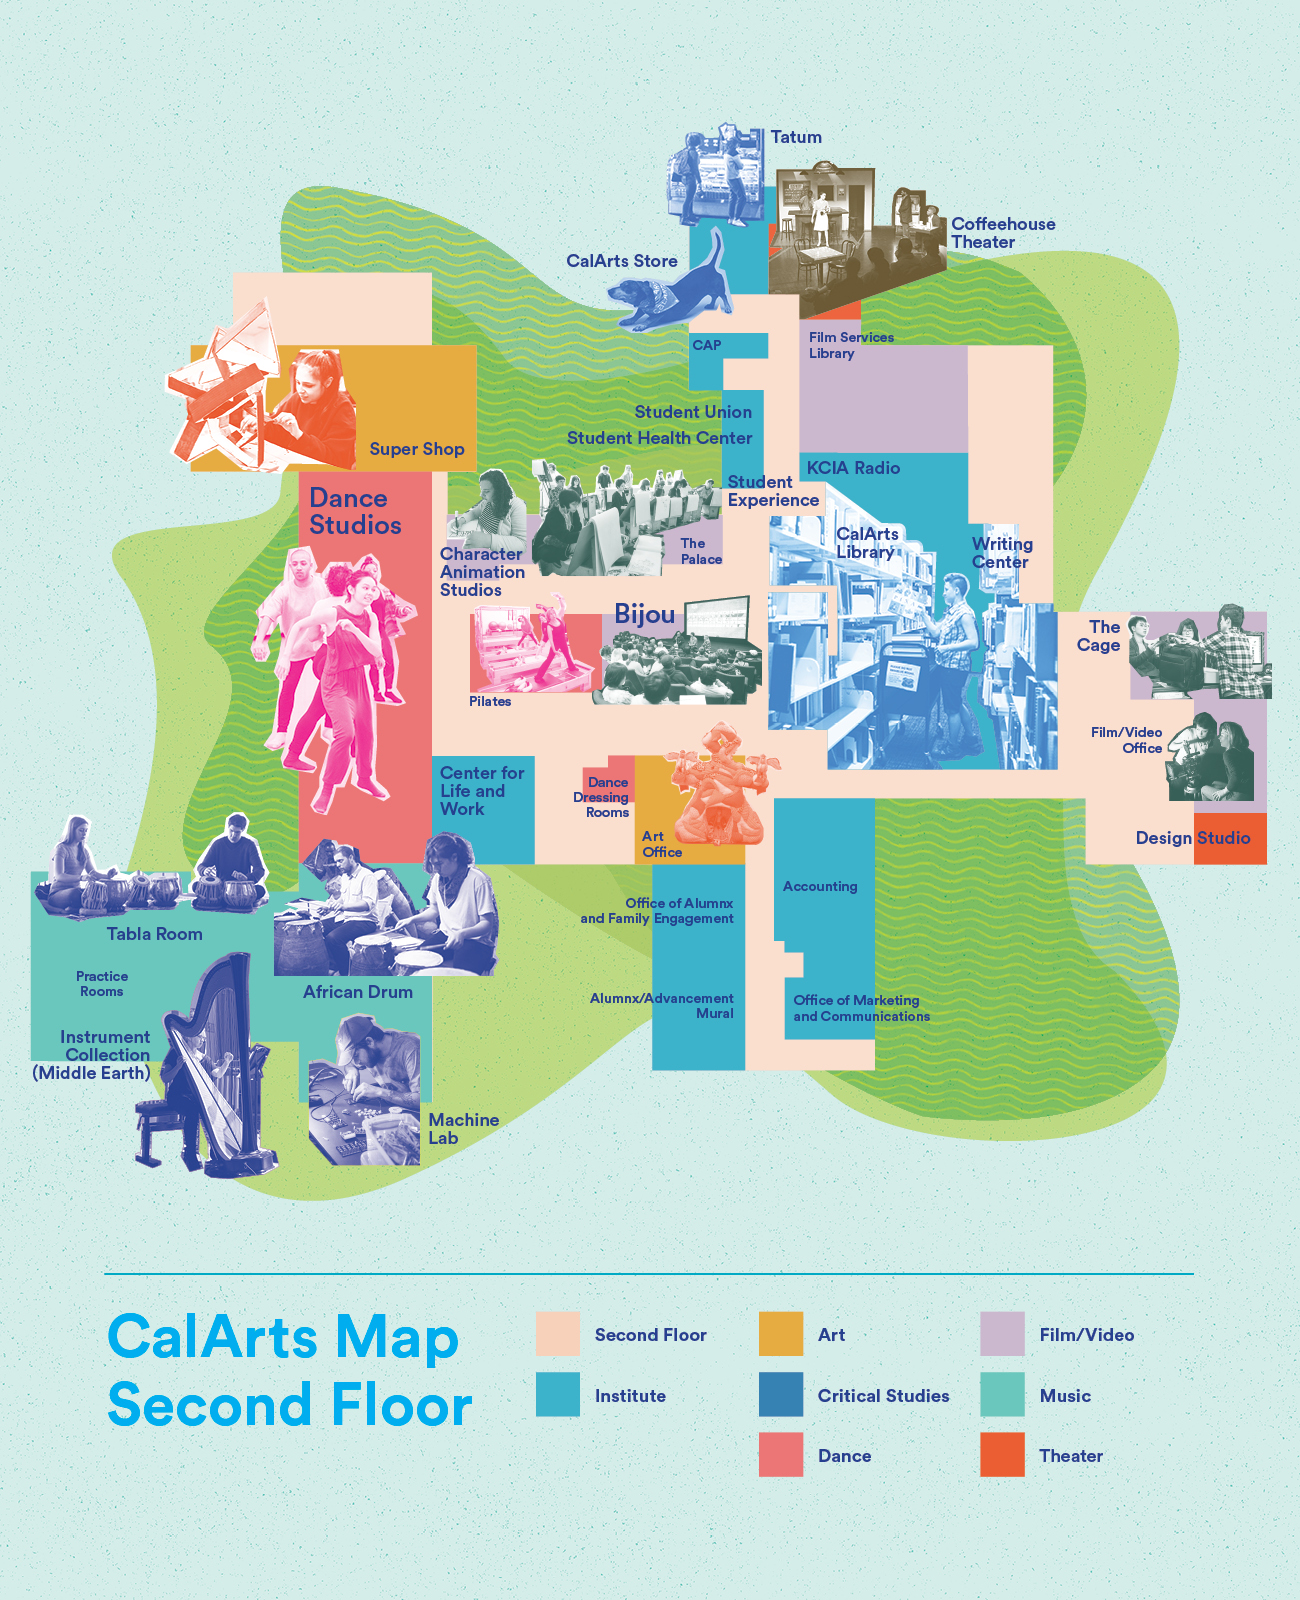 Map of the CalArts Second Floor